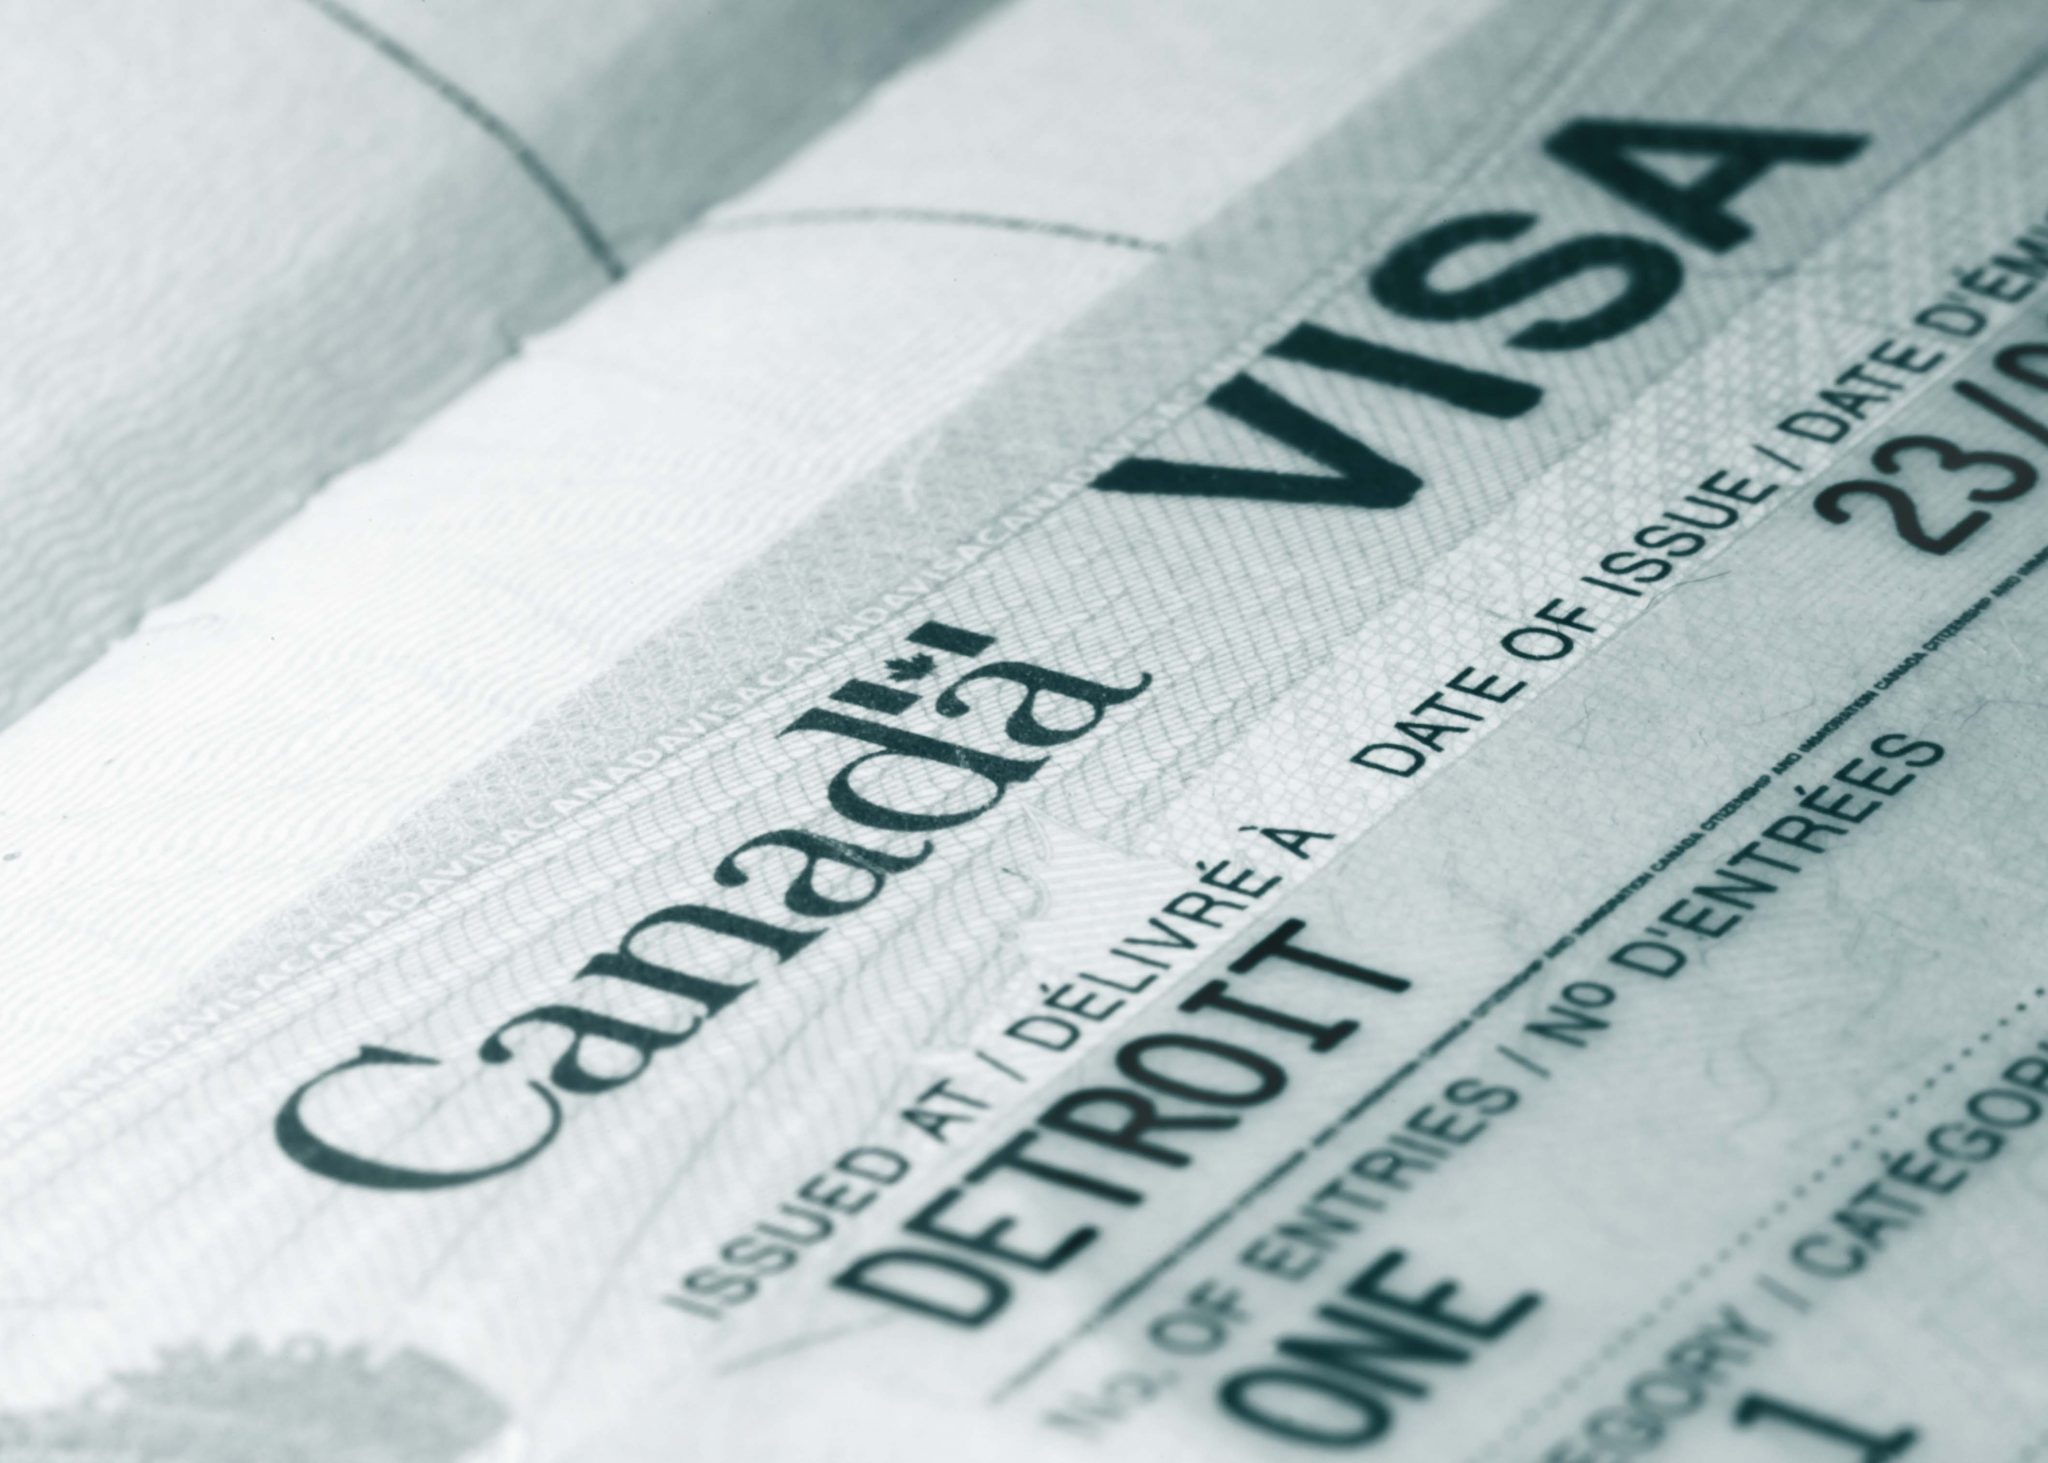 Applying for a Temporary Resident Visa in Canada